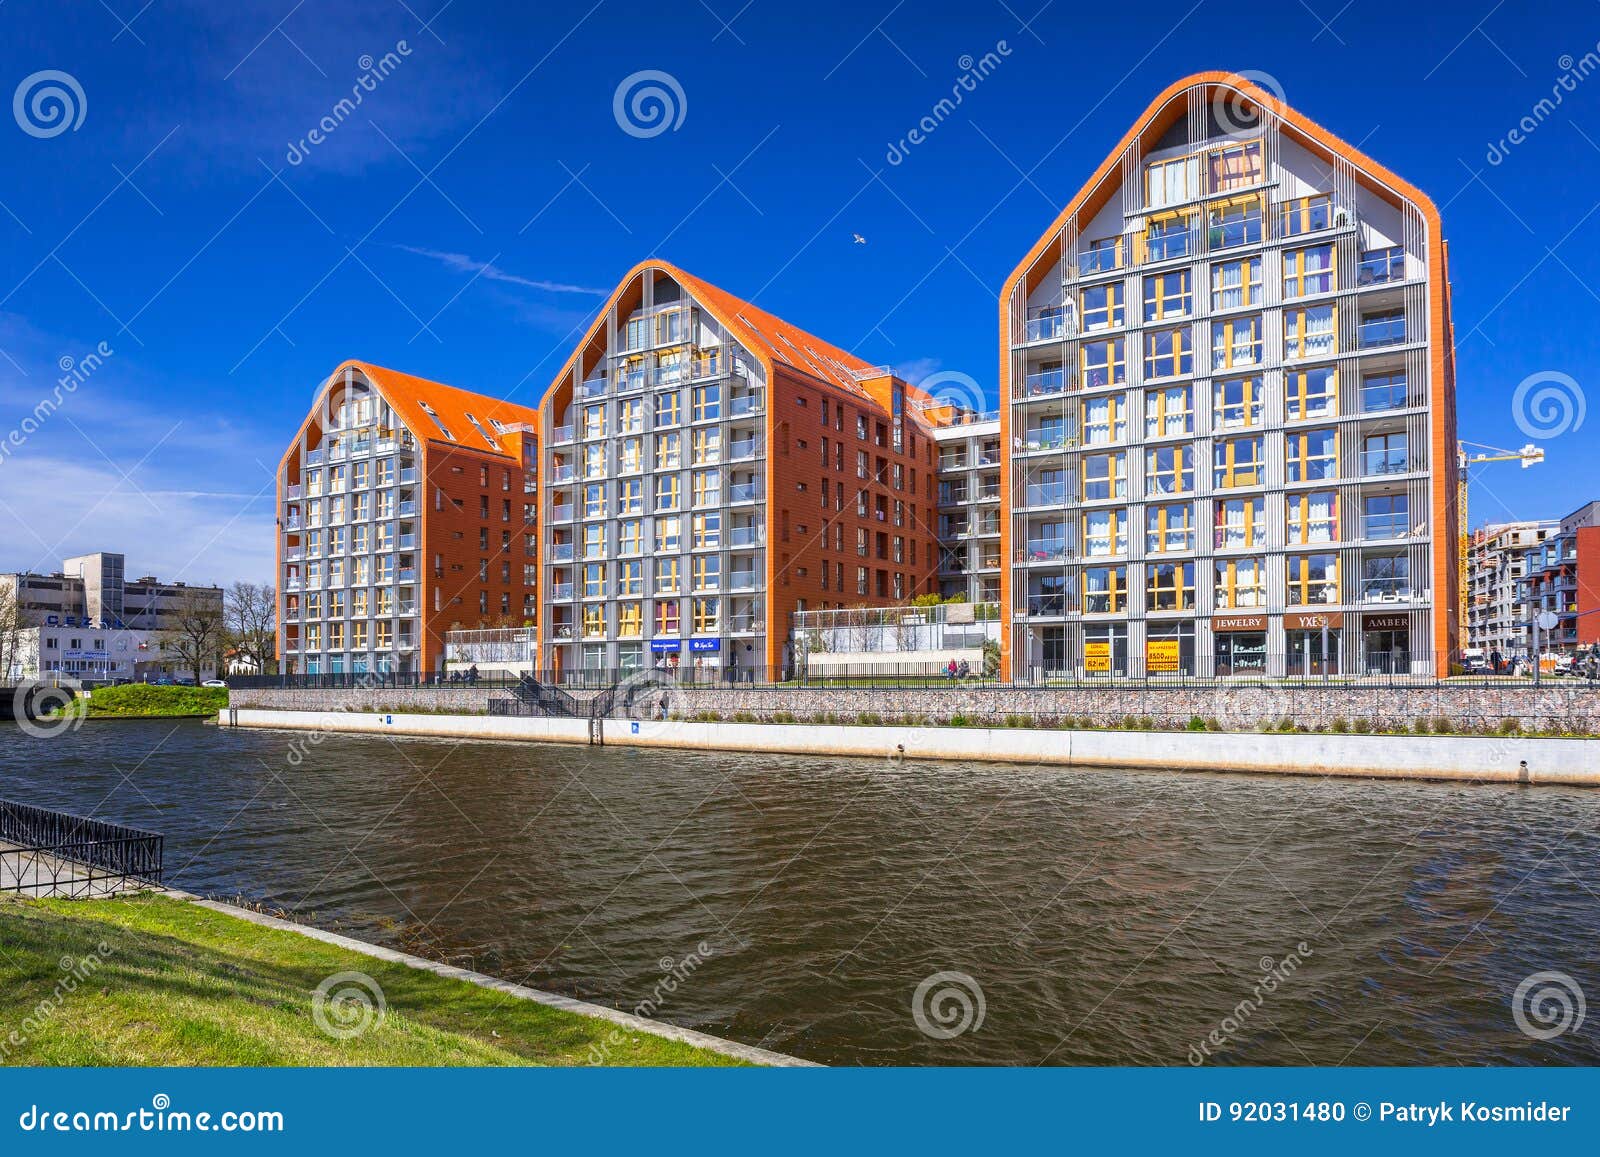 architecture-modern-apartments-motlawa-river-gdansk-poland-may-poland-riverside-buldings-situated-city-92031480.jpg